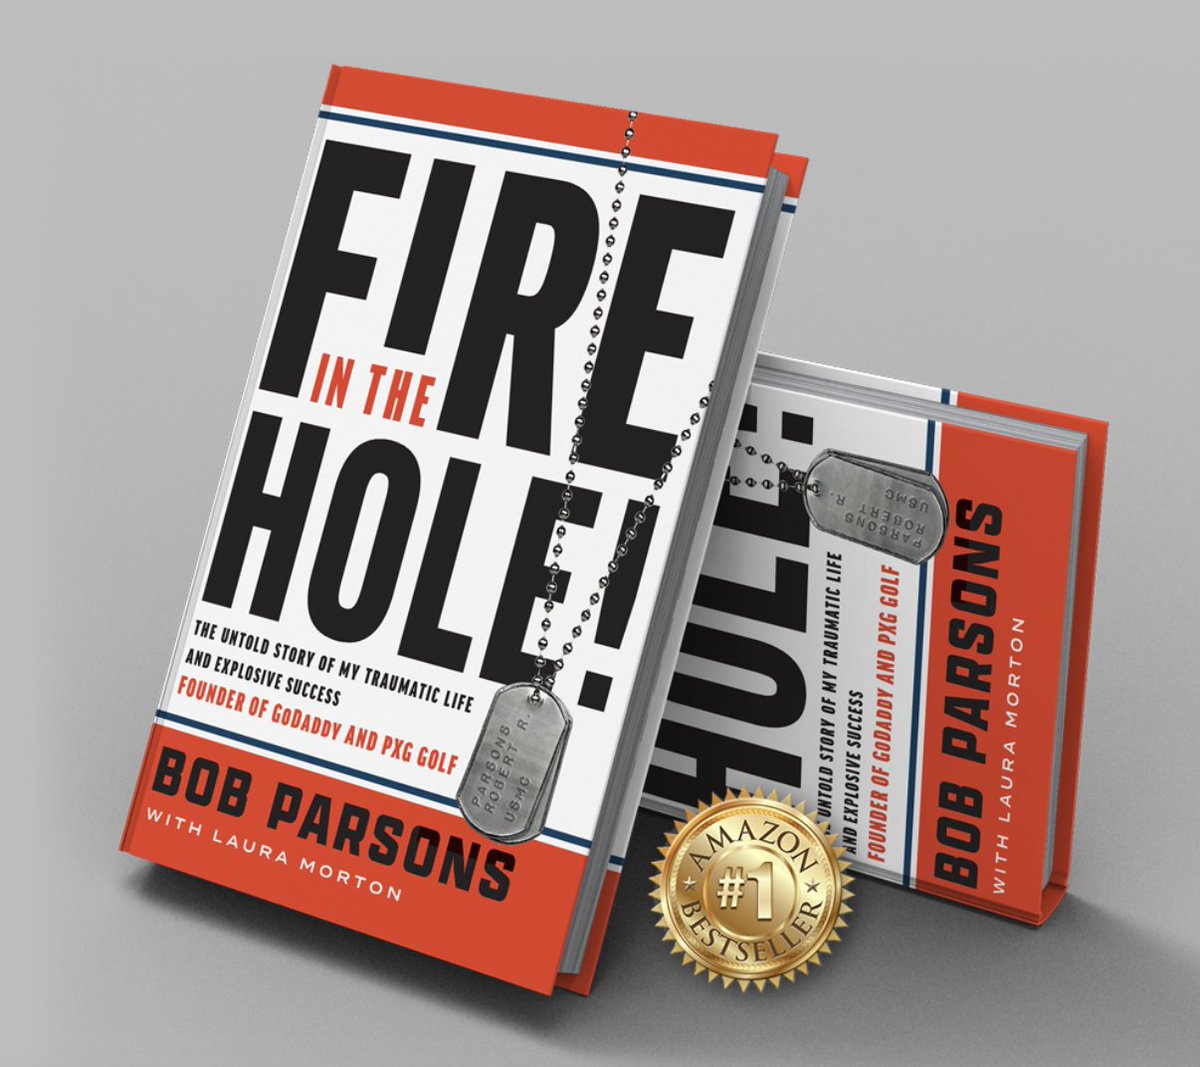 Congratulations to Bob Parsons on his new book Fire in the Hole!, which leaps over everything else on my nightstand! bobparsons.com